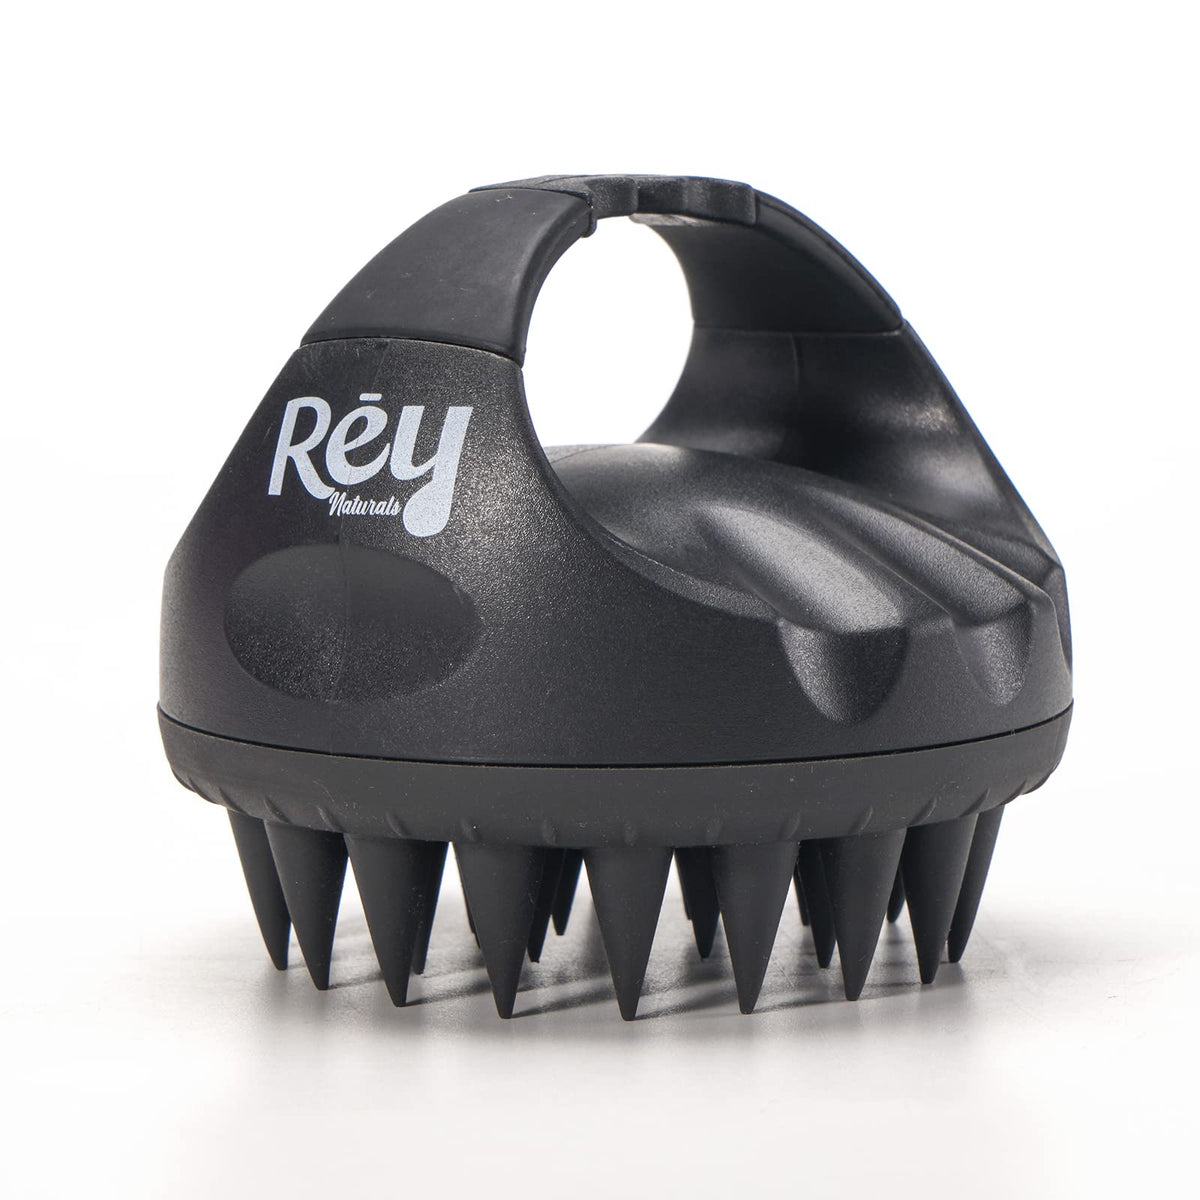 Rey Naturals Hair Scalp Massager Shampoo Brush - Hair Growth, Scalp Care, and Relaxation - Soft Bristles for Gentle Massage - Pink Color (Black)